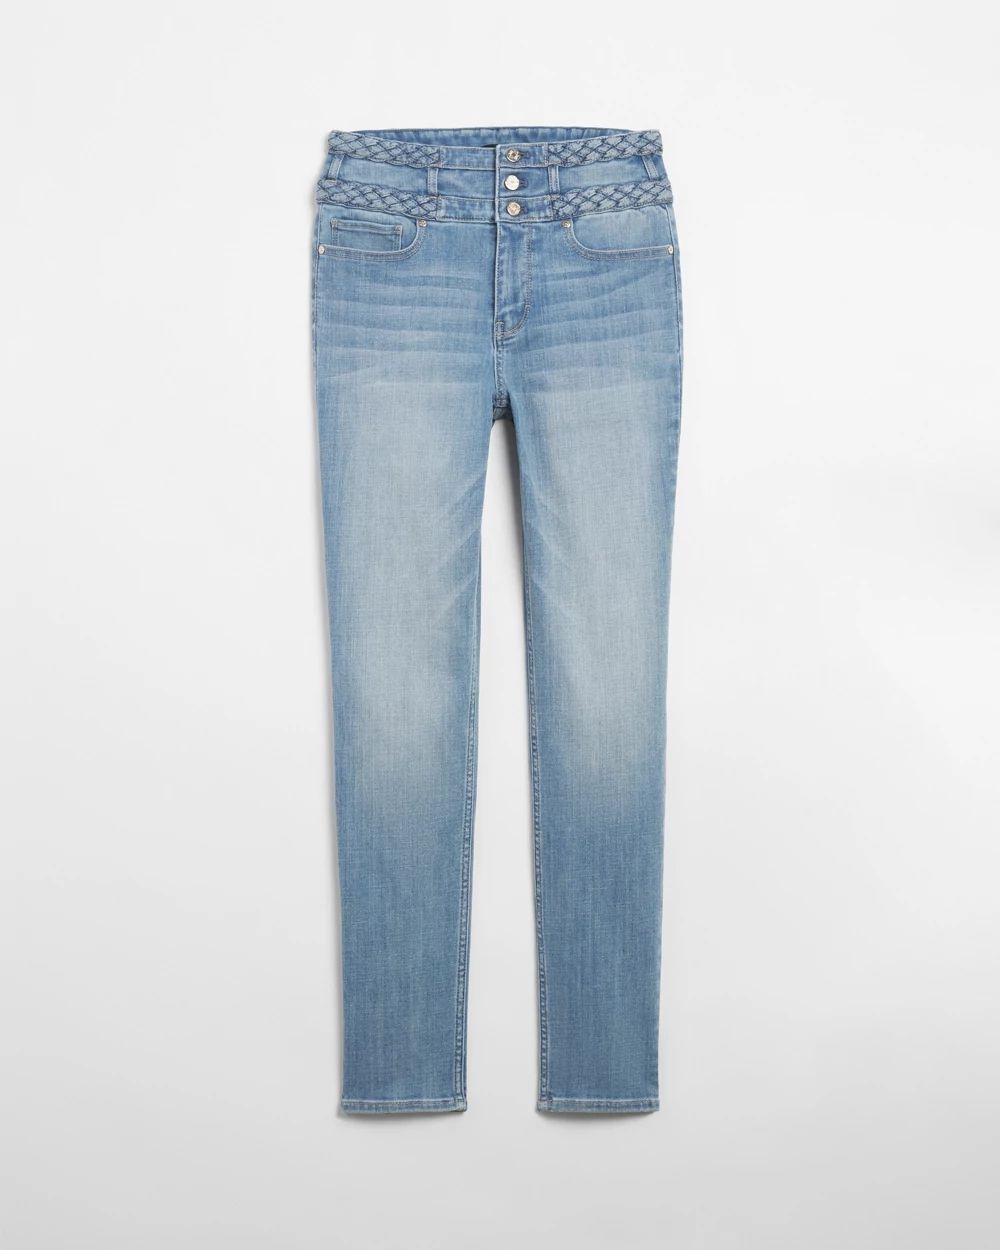 Extra High-Rise Everyday Soft Denim™ Braided Slim Ankle Jeans click to view larger image.